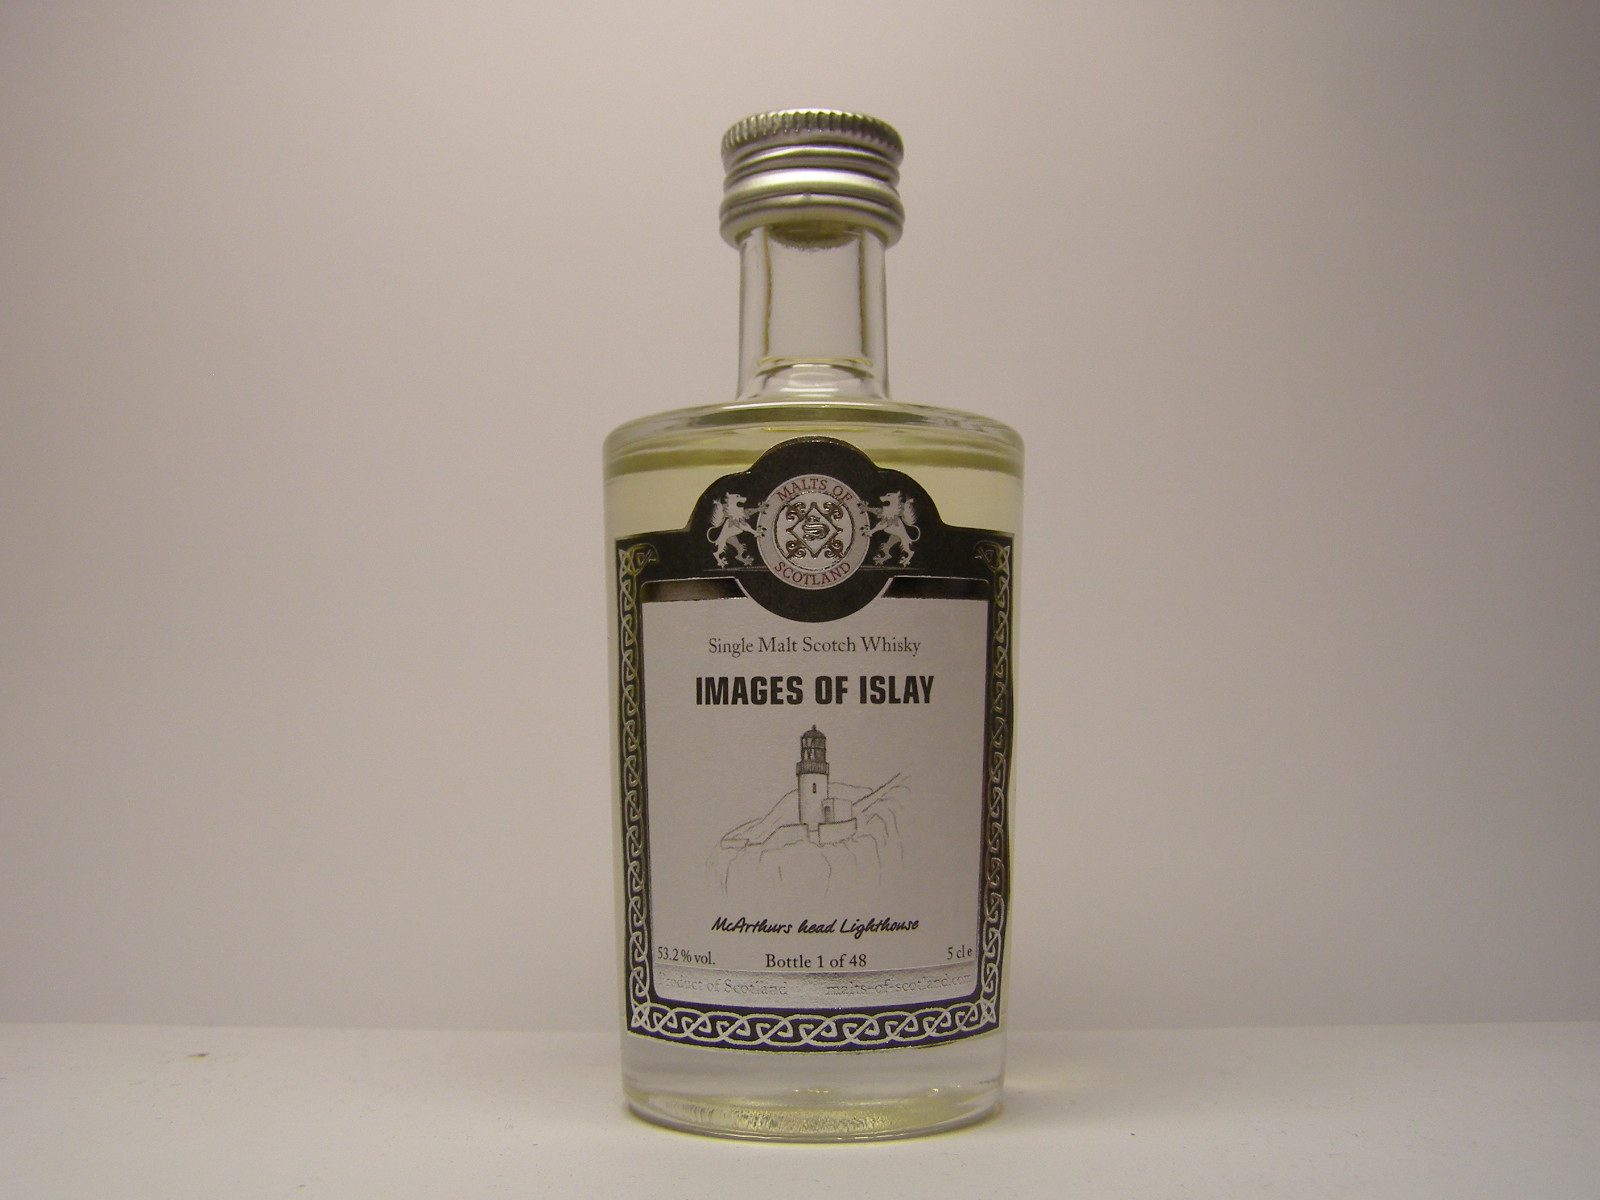 IMAGES OF ISLAY SMSW "Malts of Scotland" 5cle 53,2%vol. 